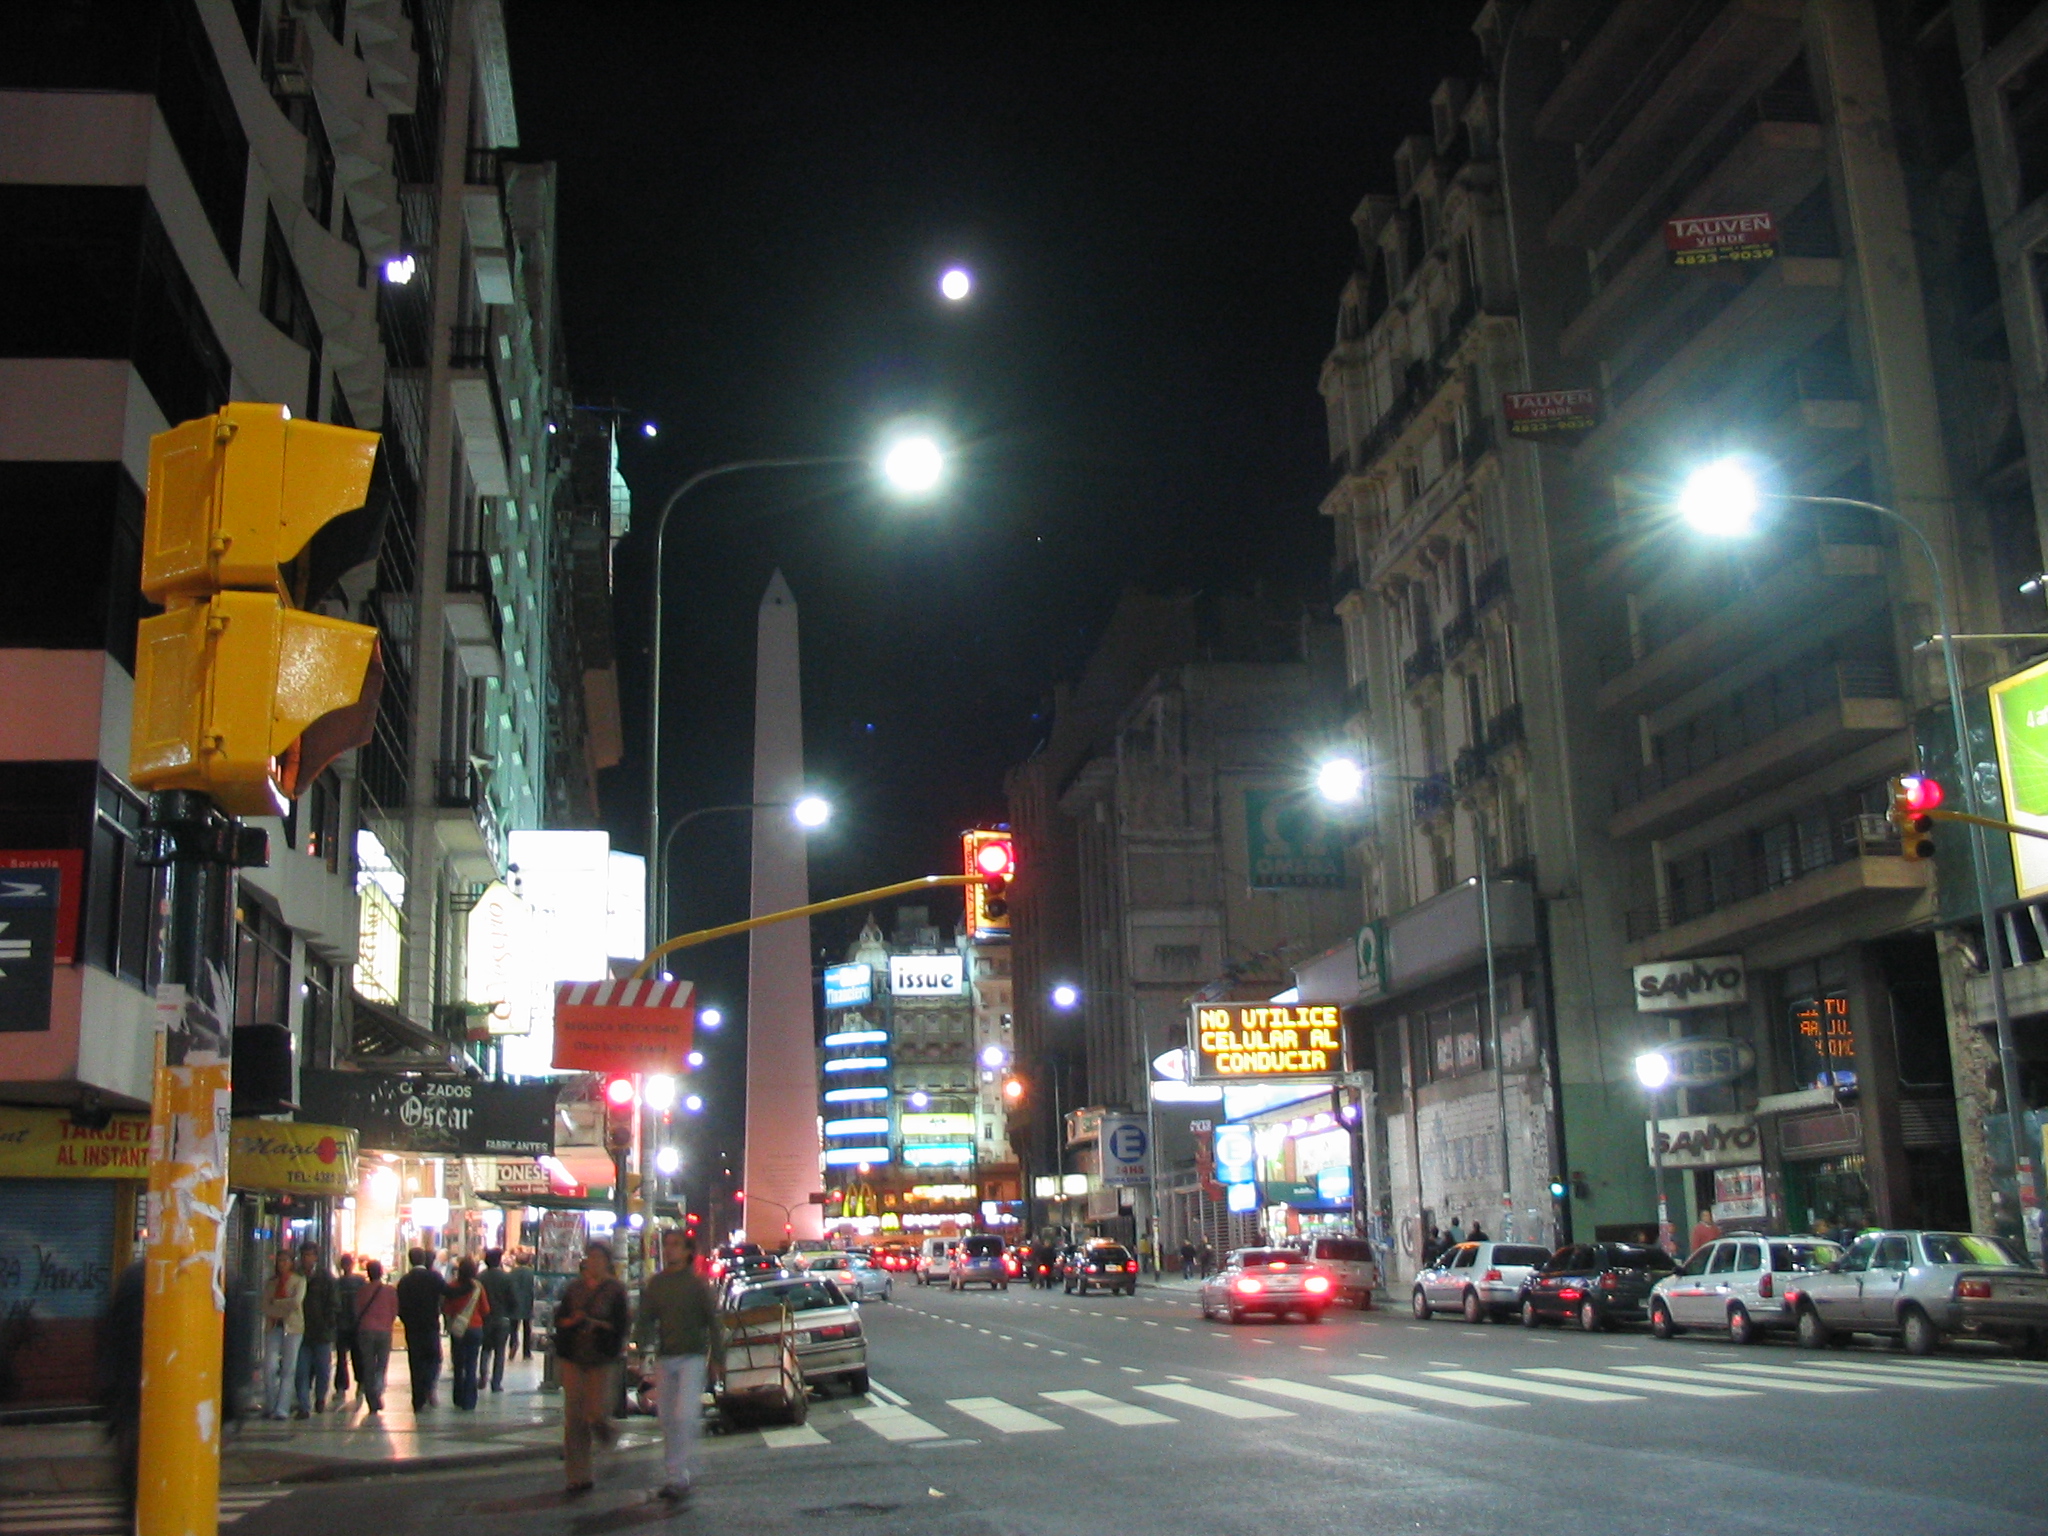 a busy city at night with people crossing the street